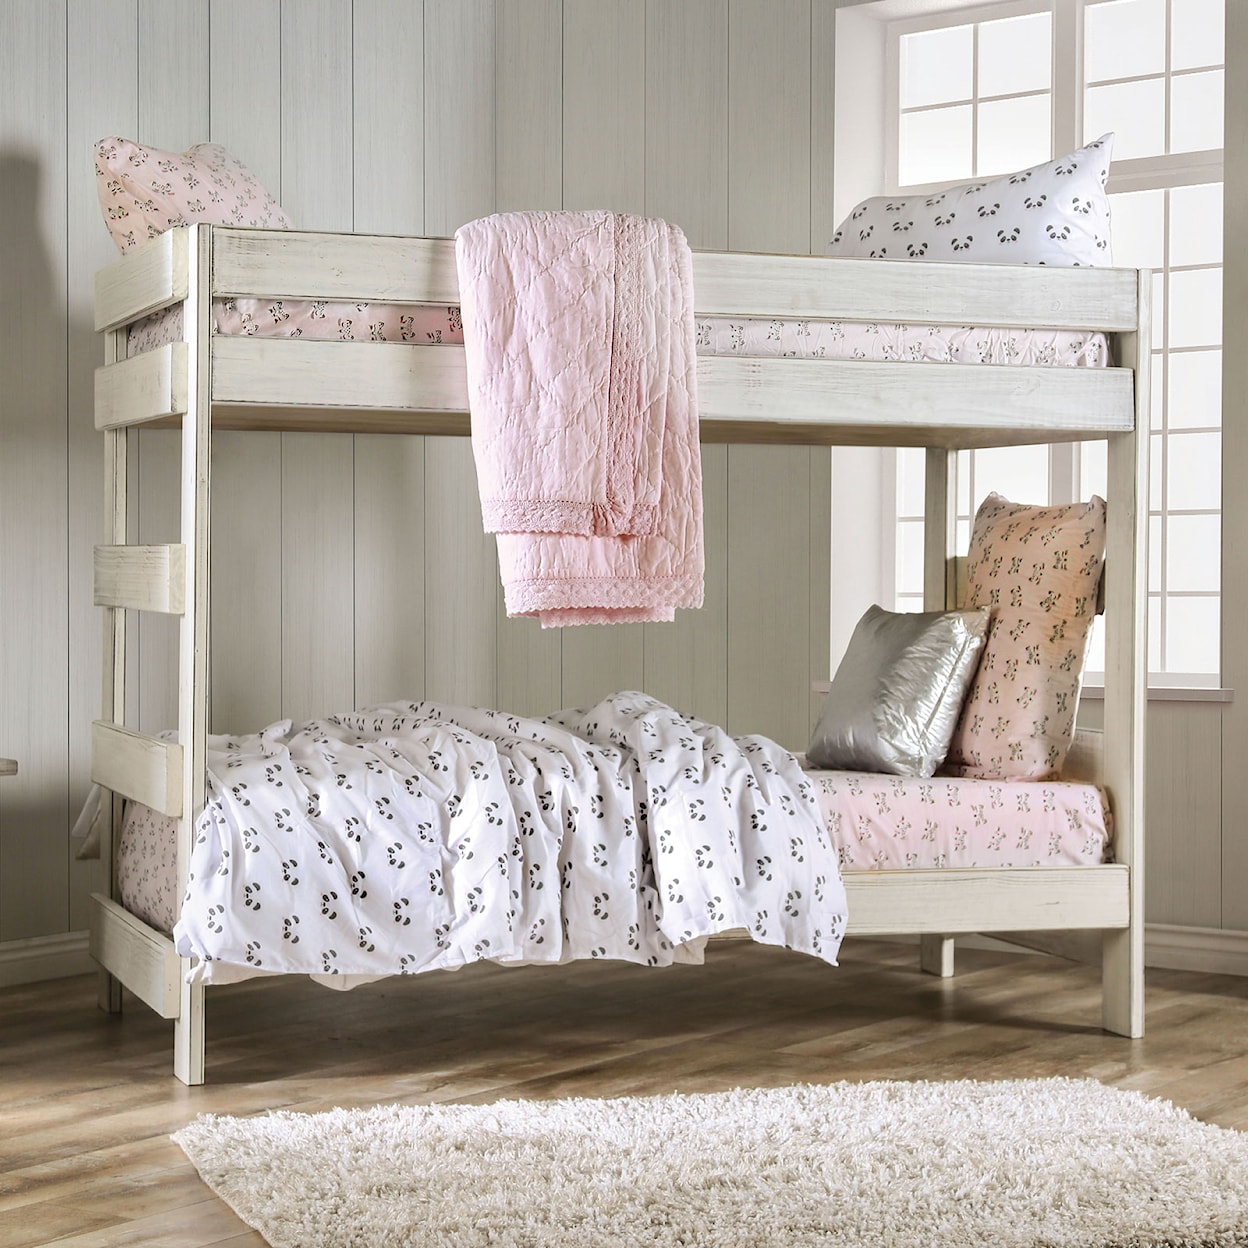 Furniture of America Arlette Twin/Twin Bunk Bed with 2 Slat Kits